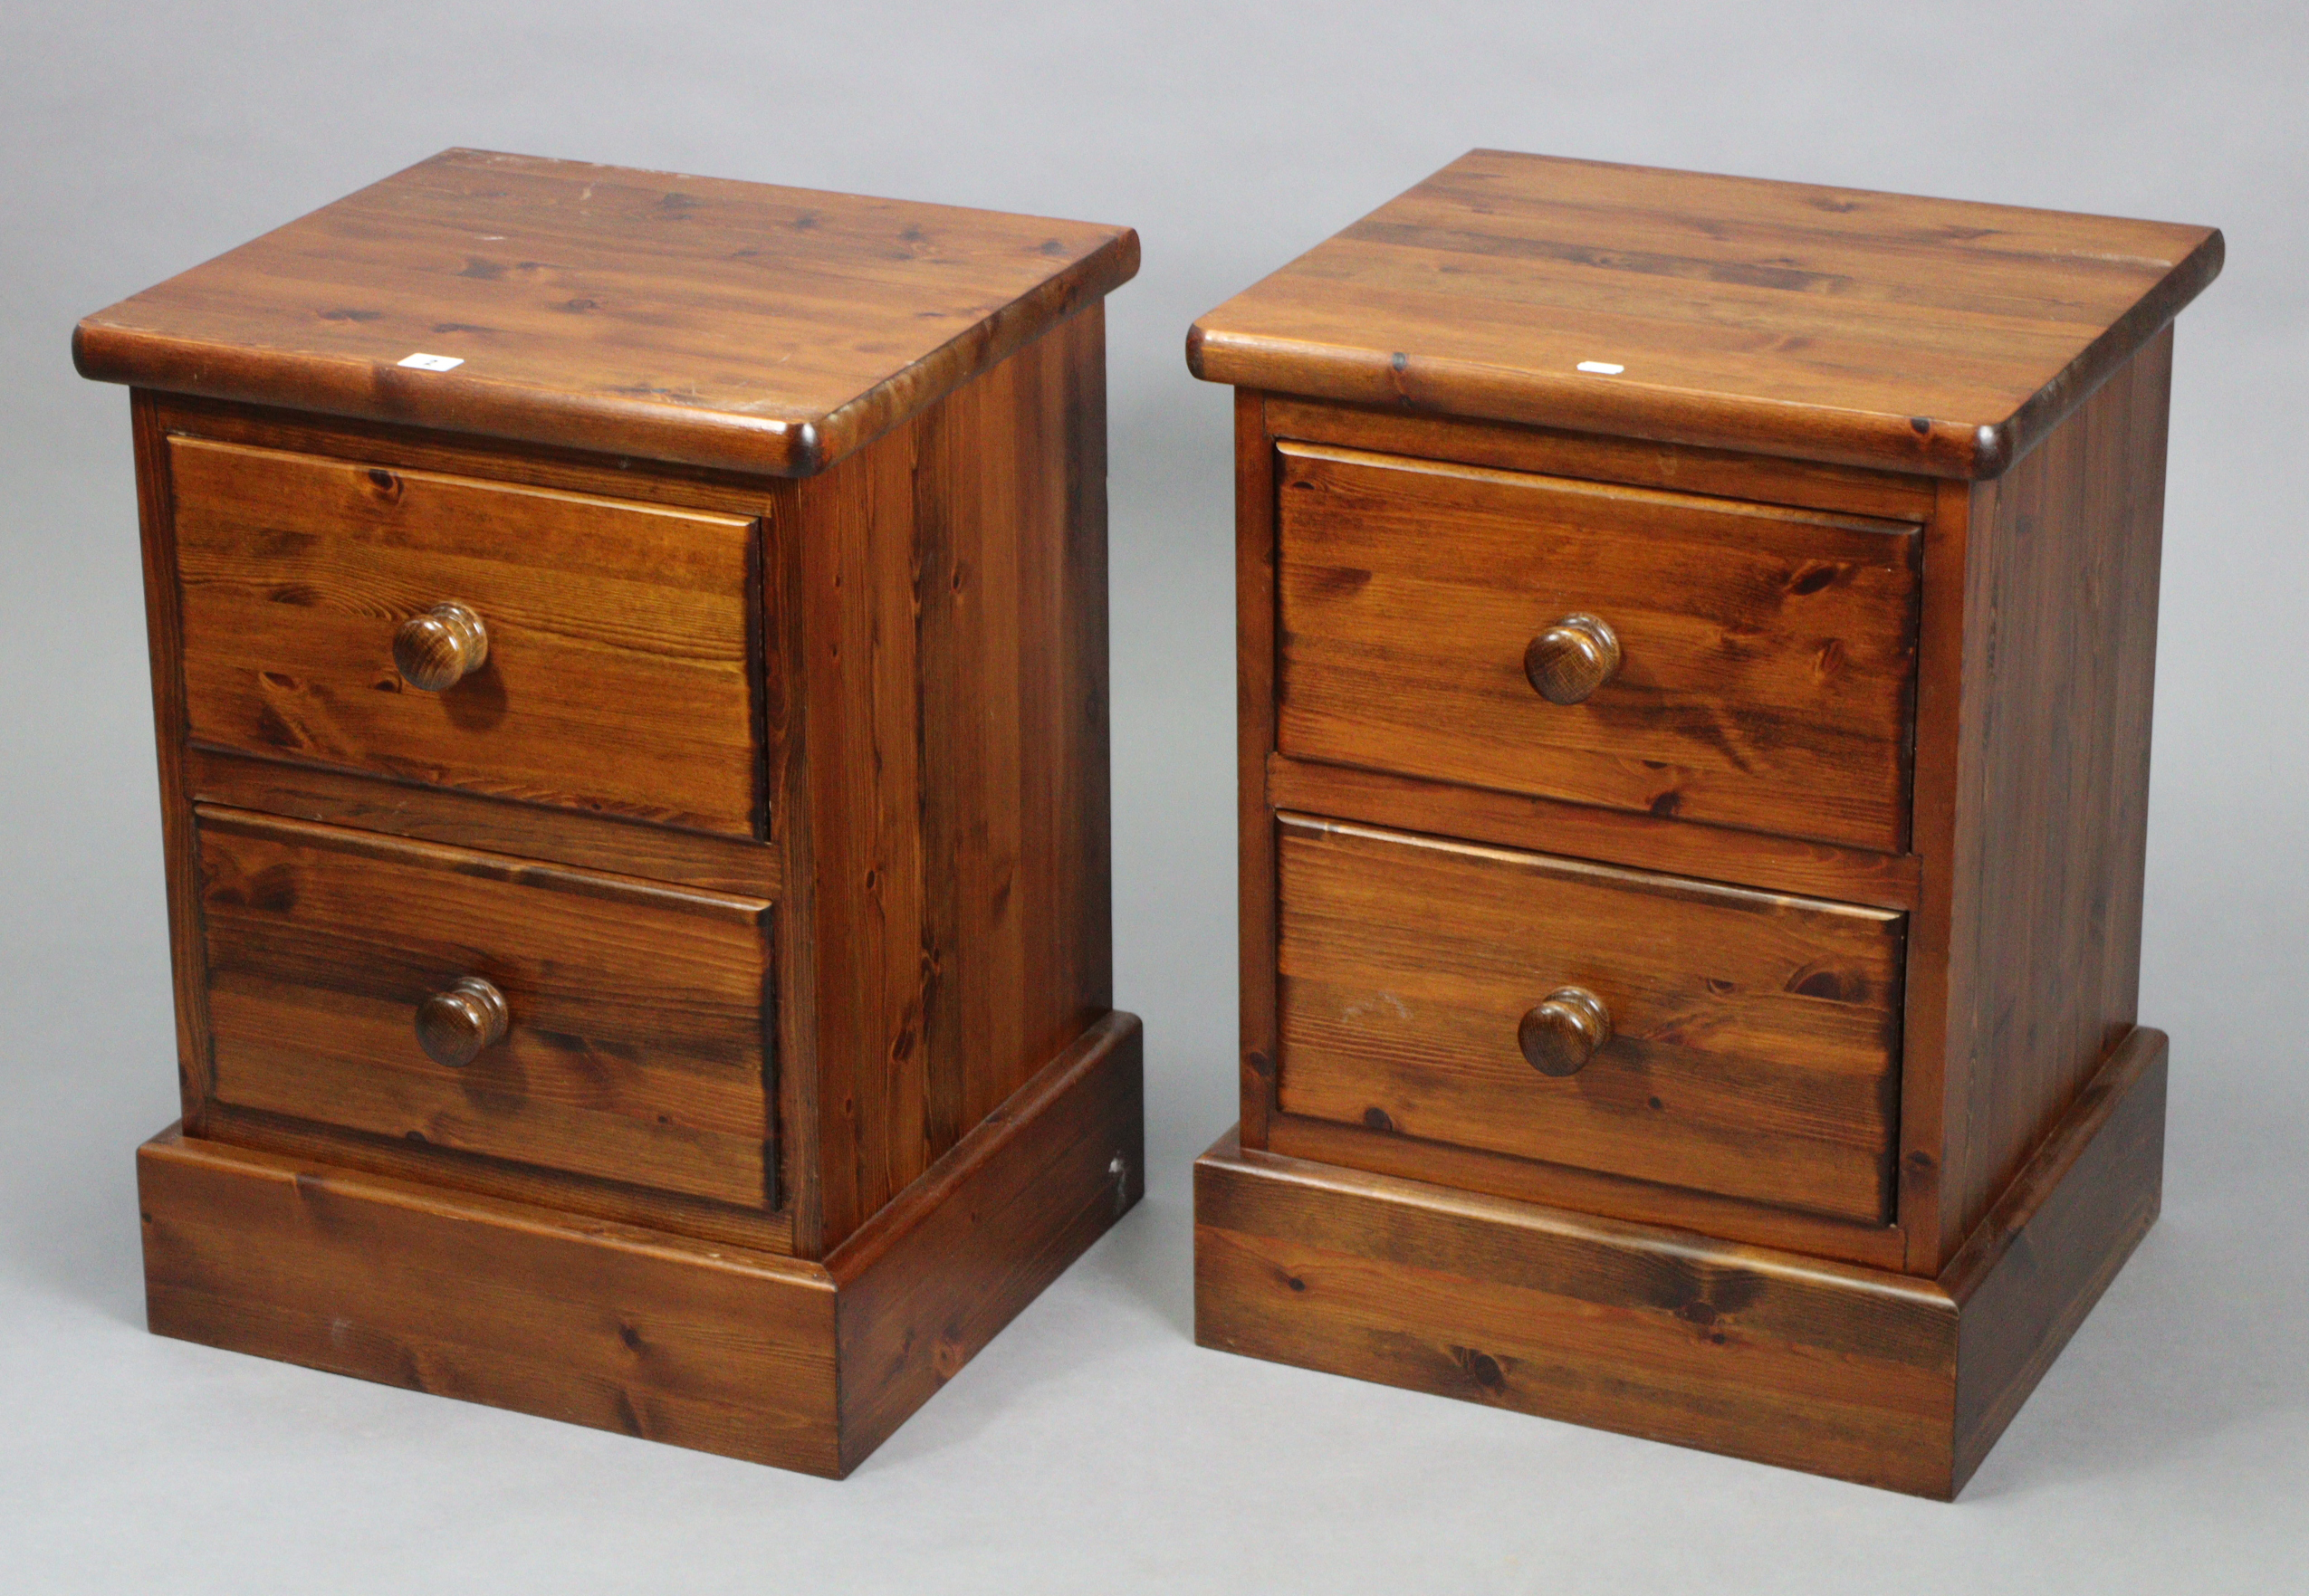 A pair of pine two-drawer bedside chests, 18¾” wide x 25” high x 16¾” deep.